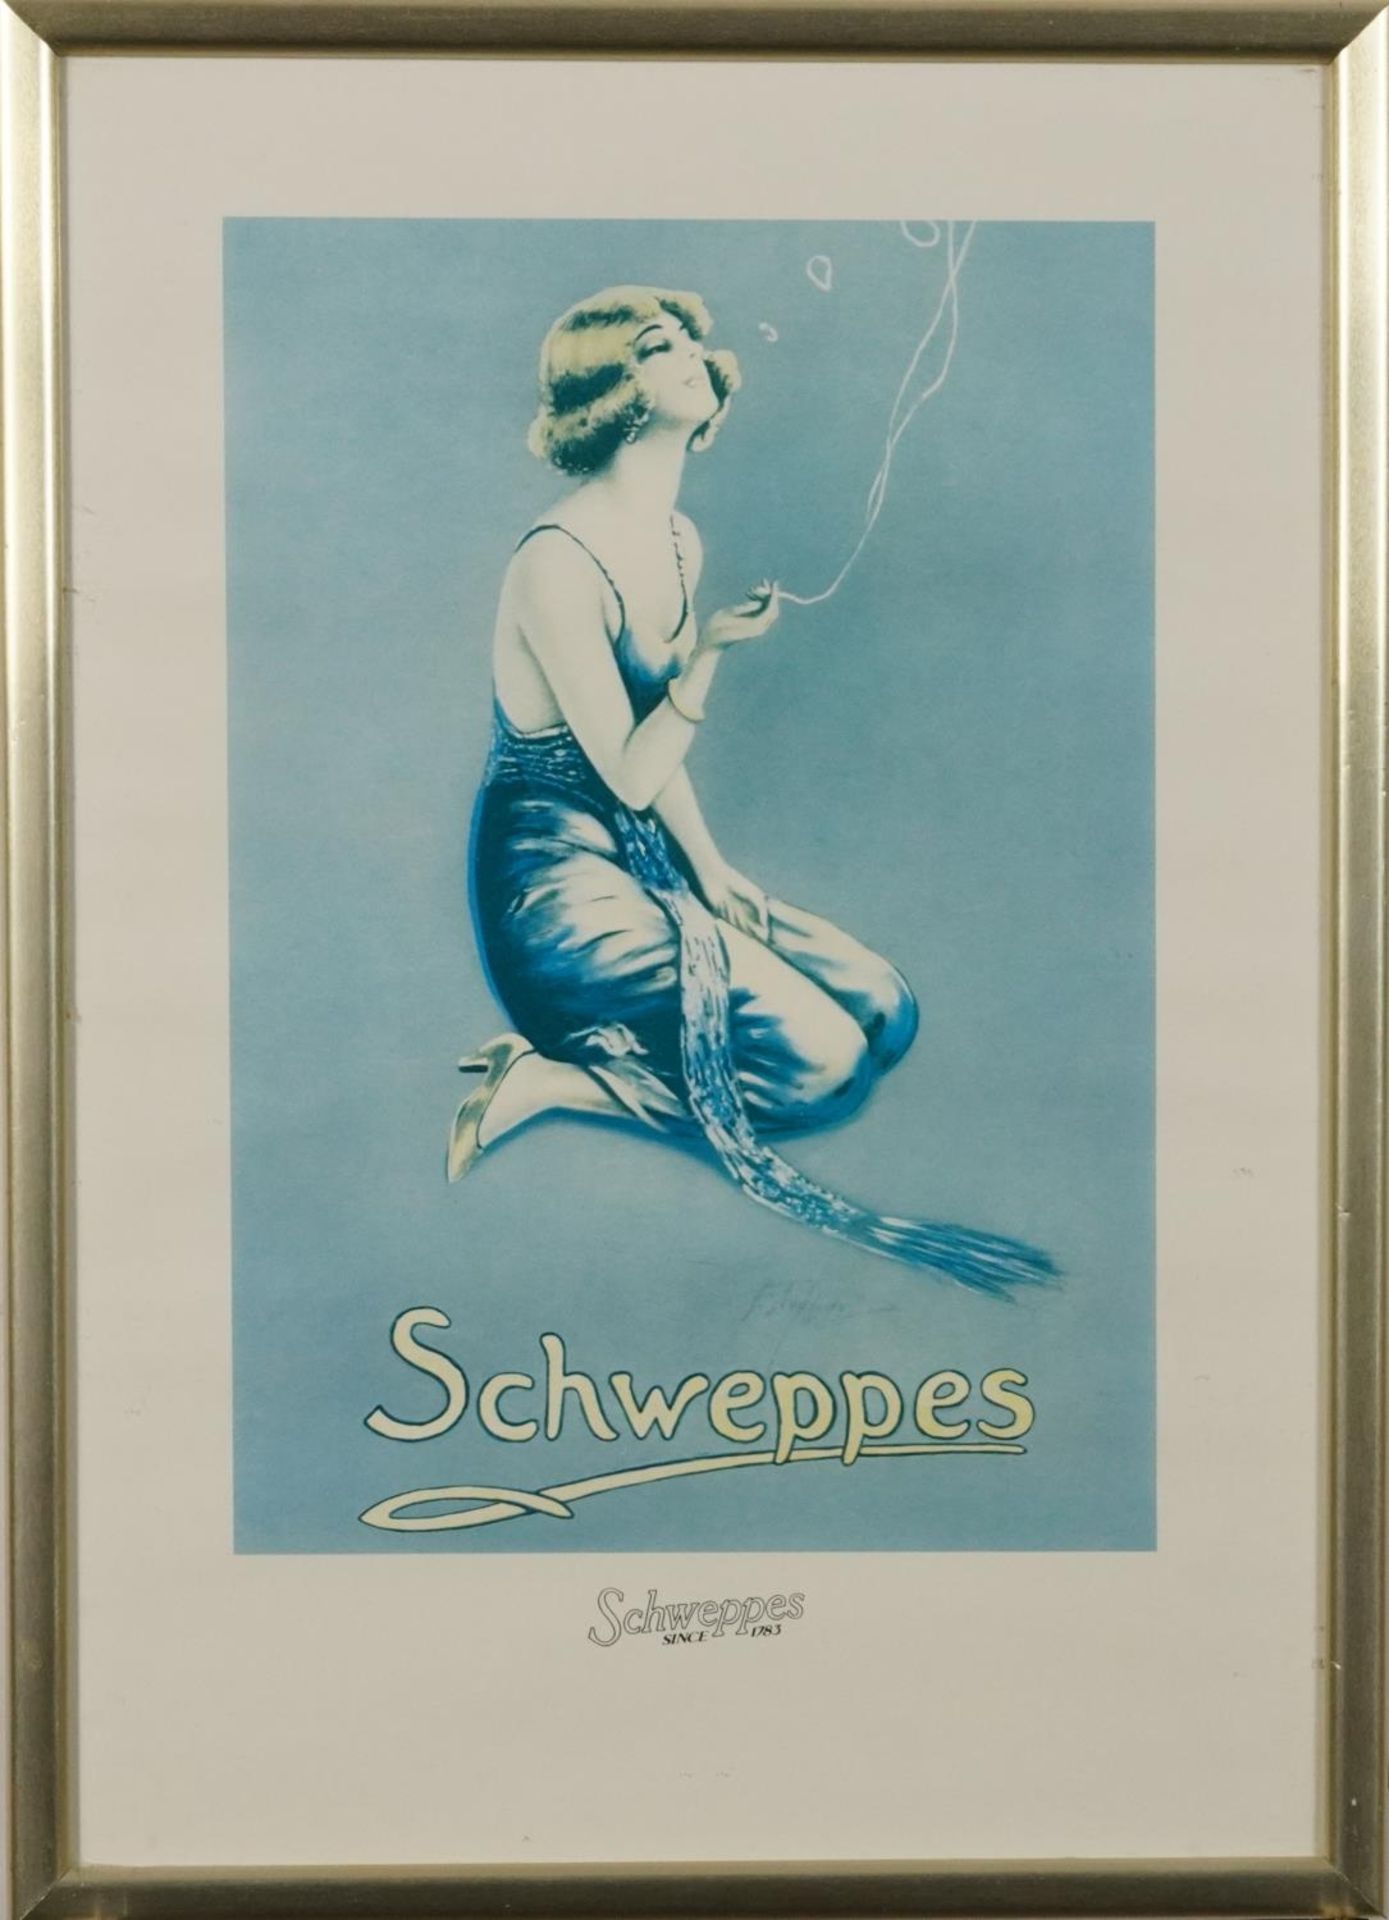 Schweppes, Cider, Tonic Water, Ginger Ale and Lemon Squash, set of six posters, framed and glazed, - Image 13 of 20